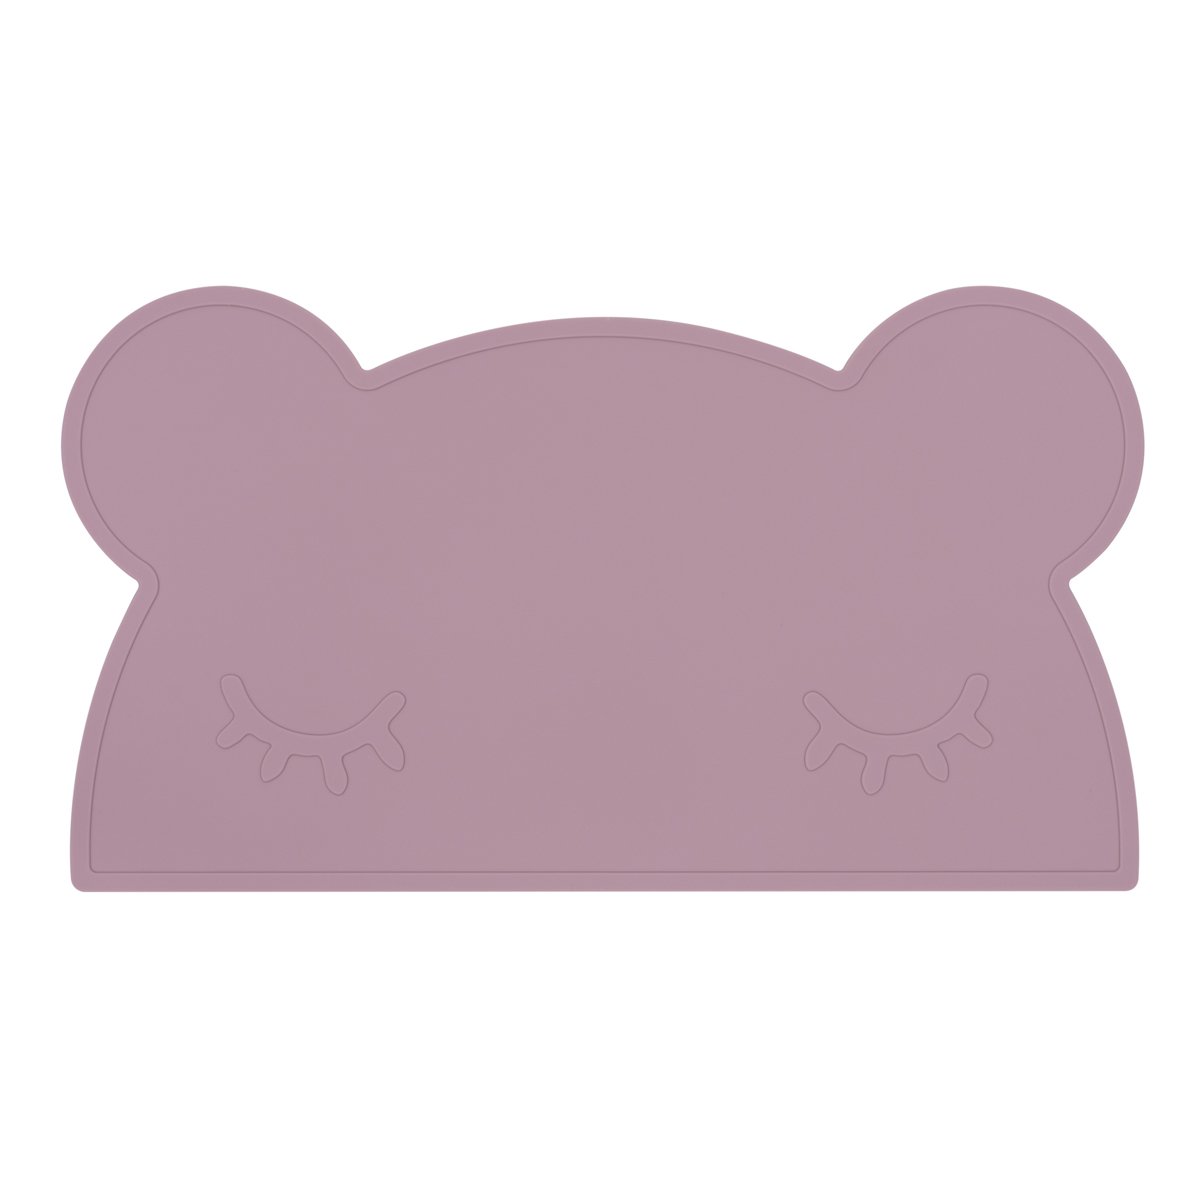 Bear Placemat (Dusty Rose)